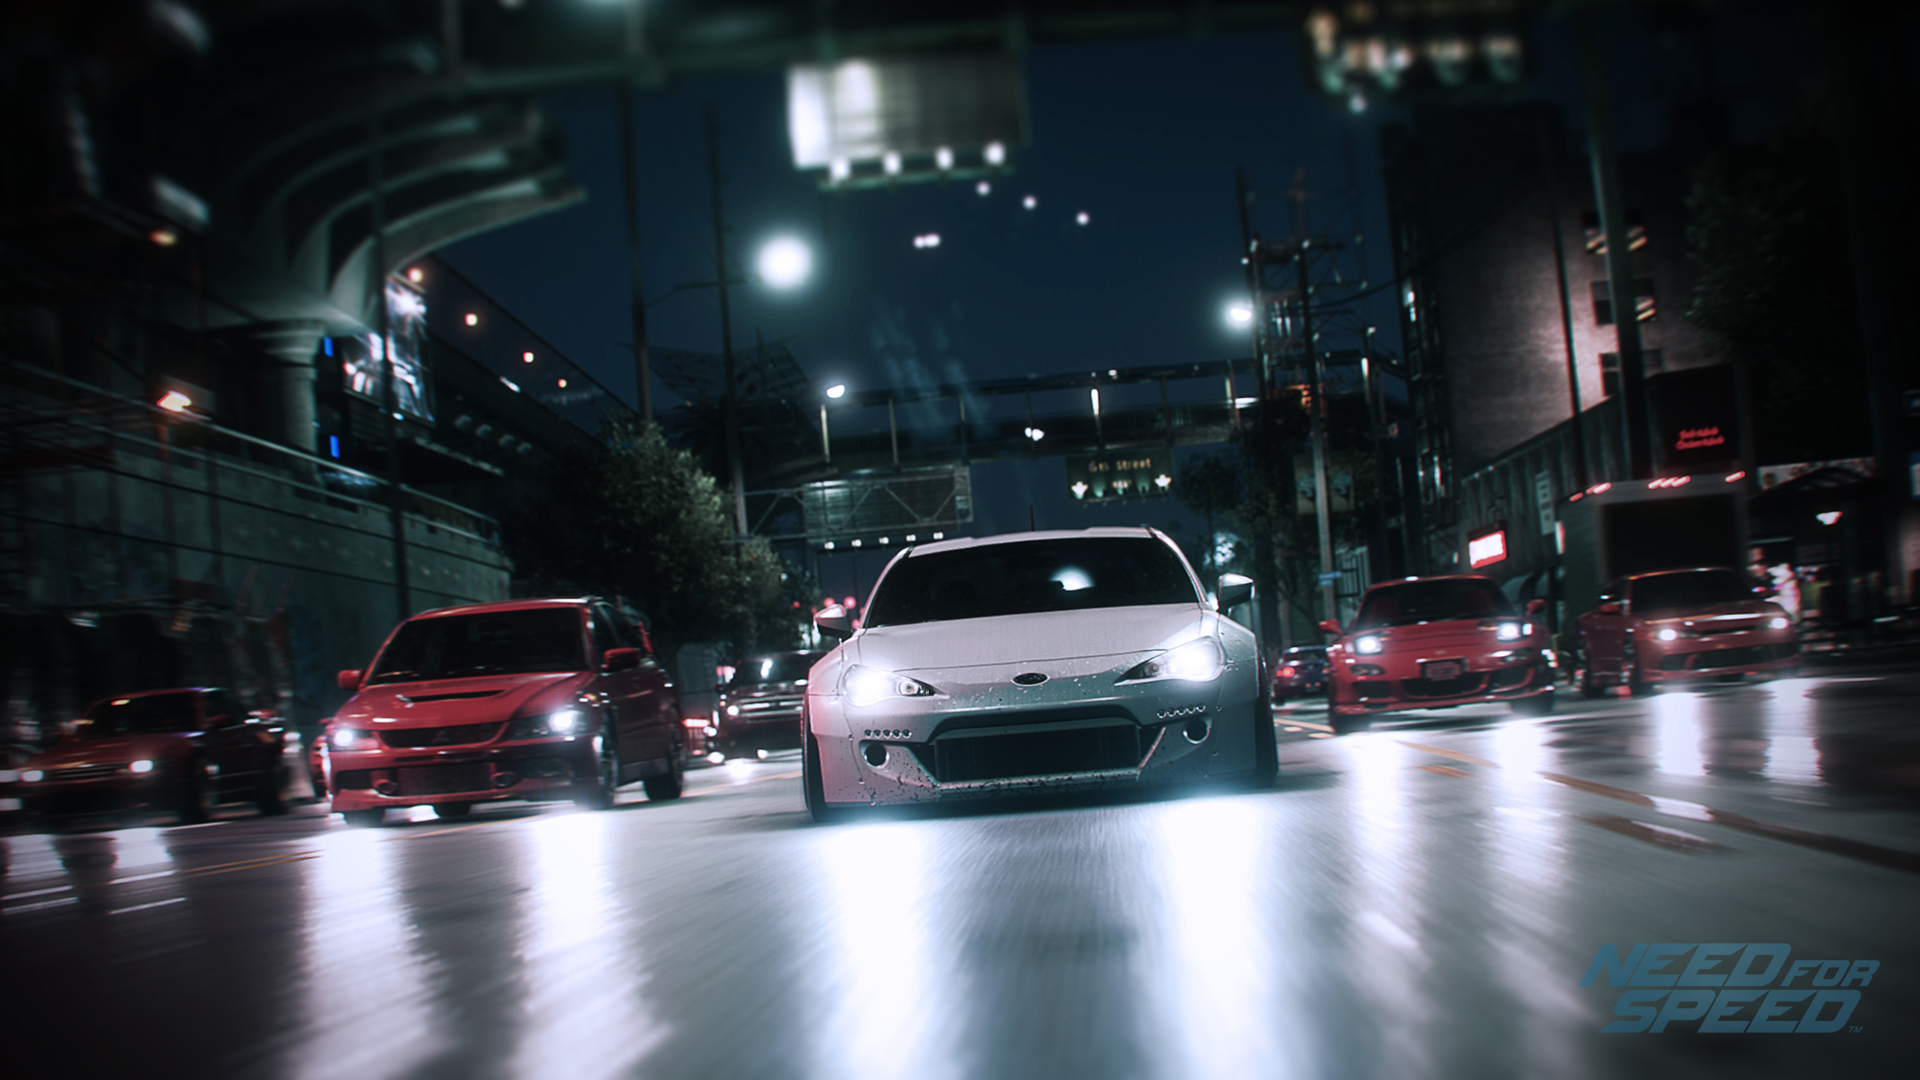 Need For Speed Wallpaper Pictures Image